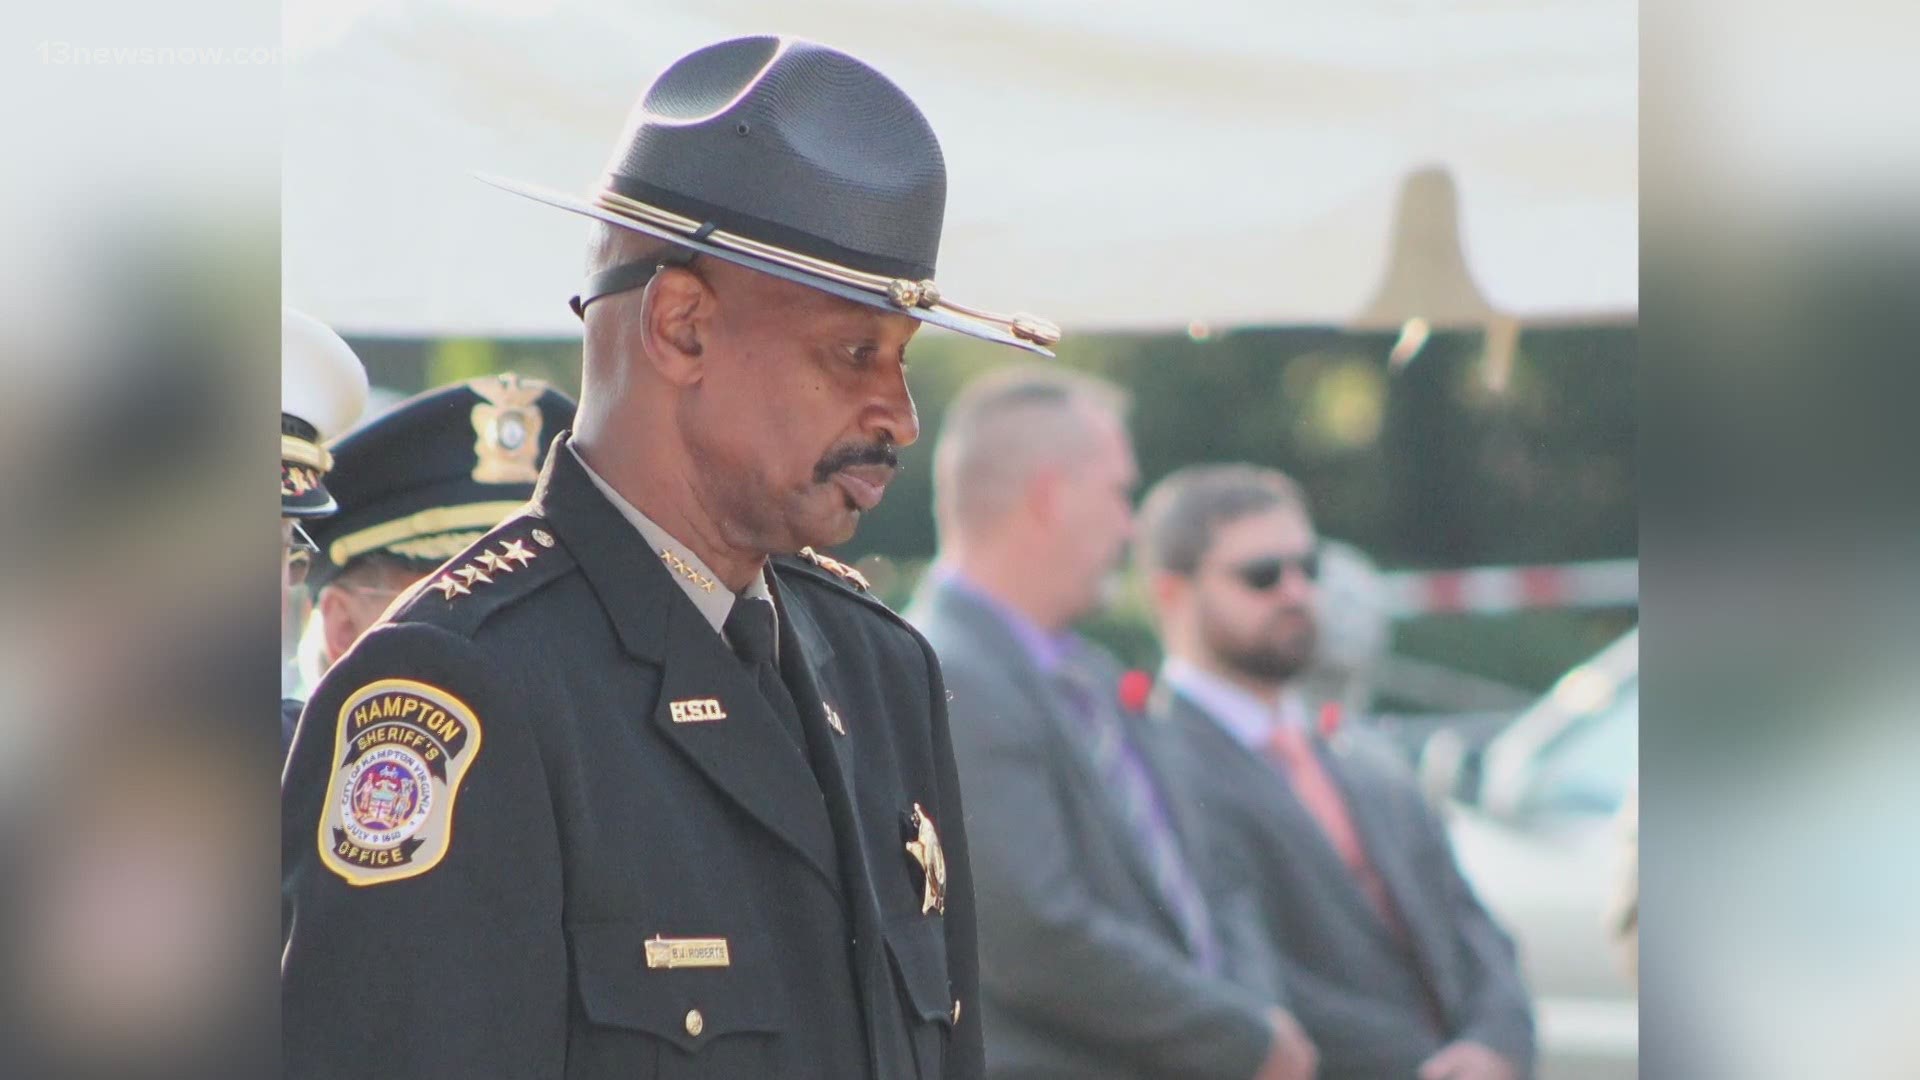 Hampton Sheriff B.J. Roberts, the first African-American to be sworn in as President of the National Sheriff’s Association in 2010 passed away on Dec. 26, 2020.